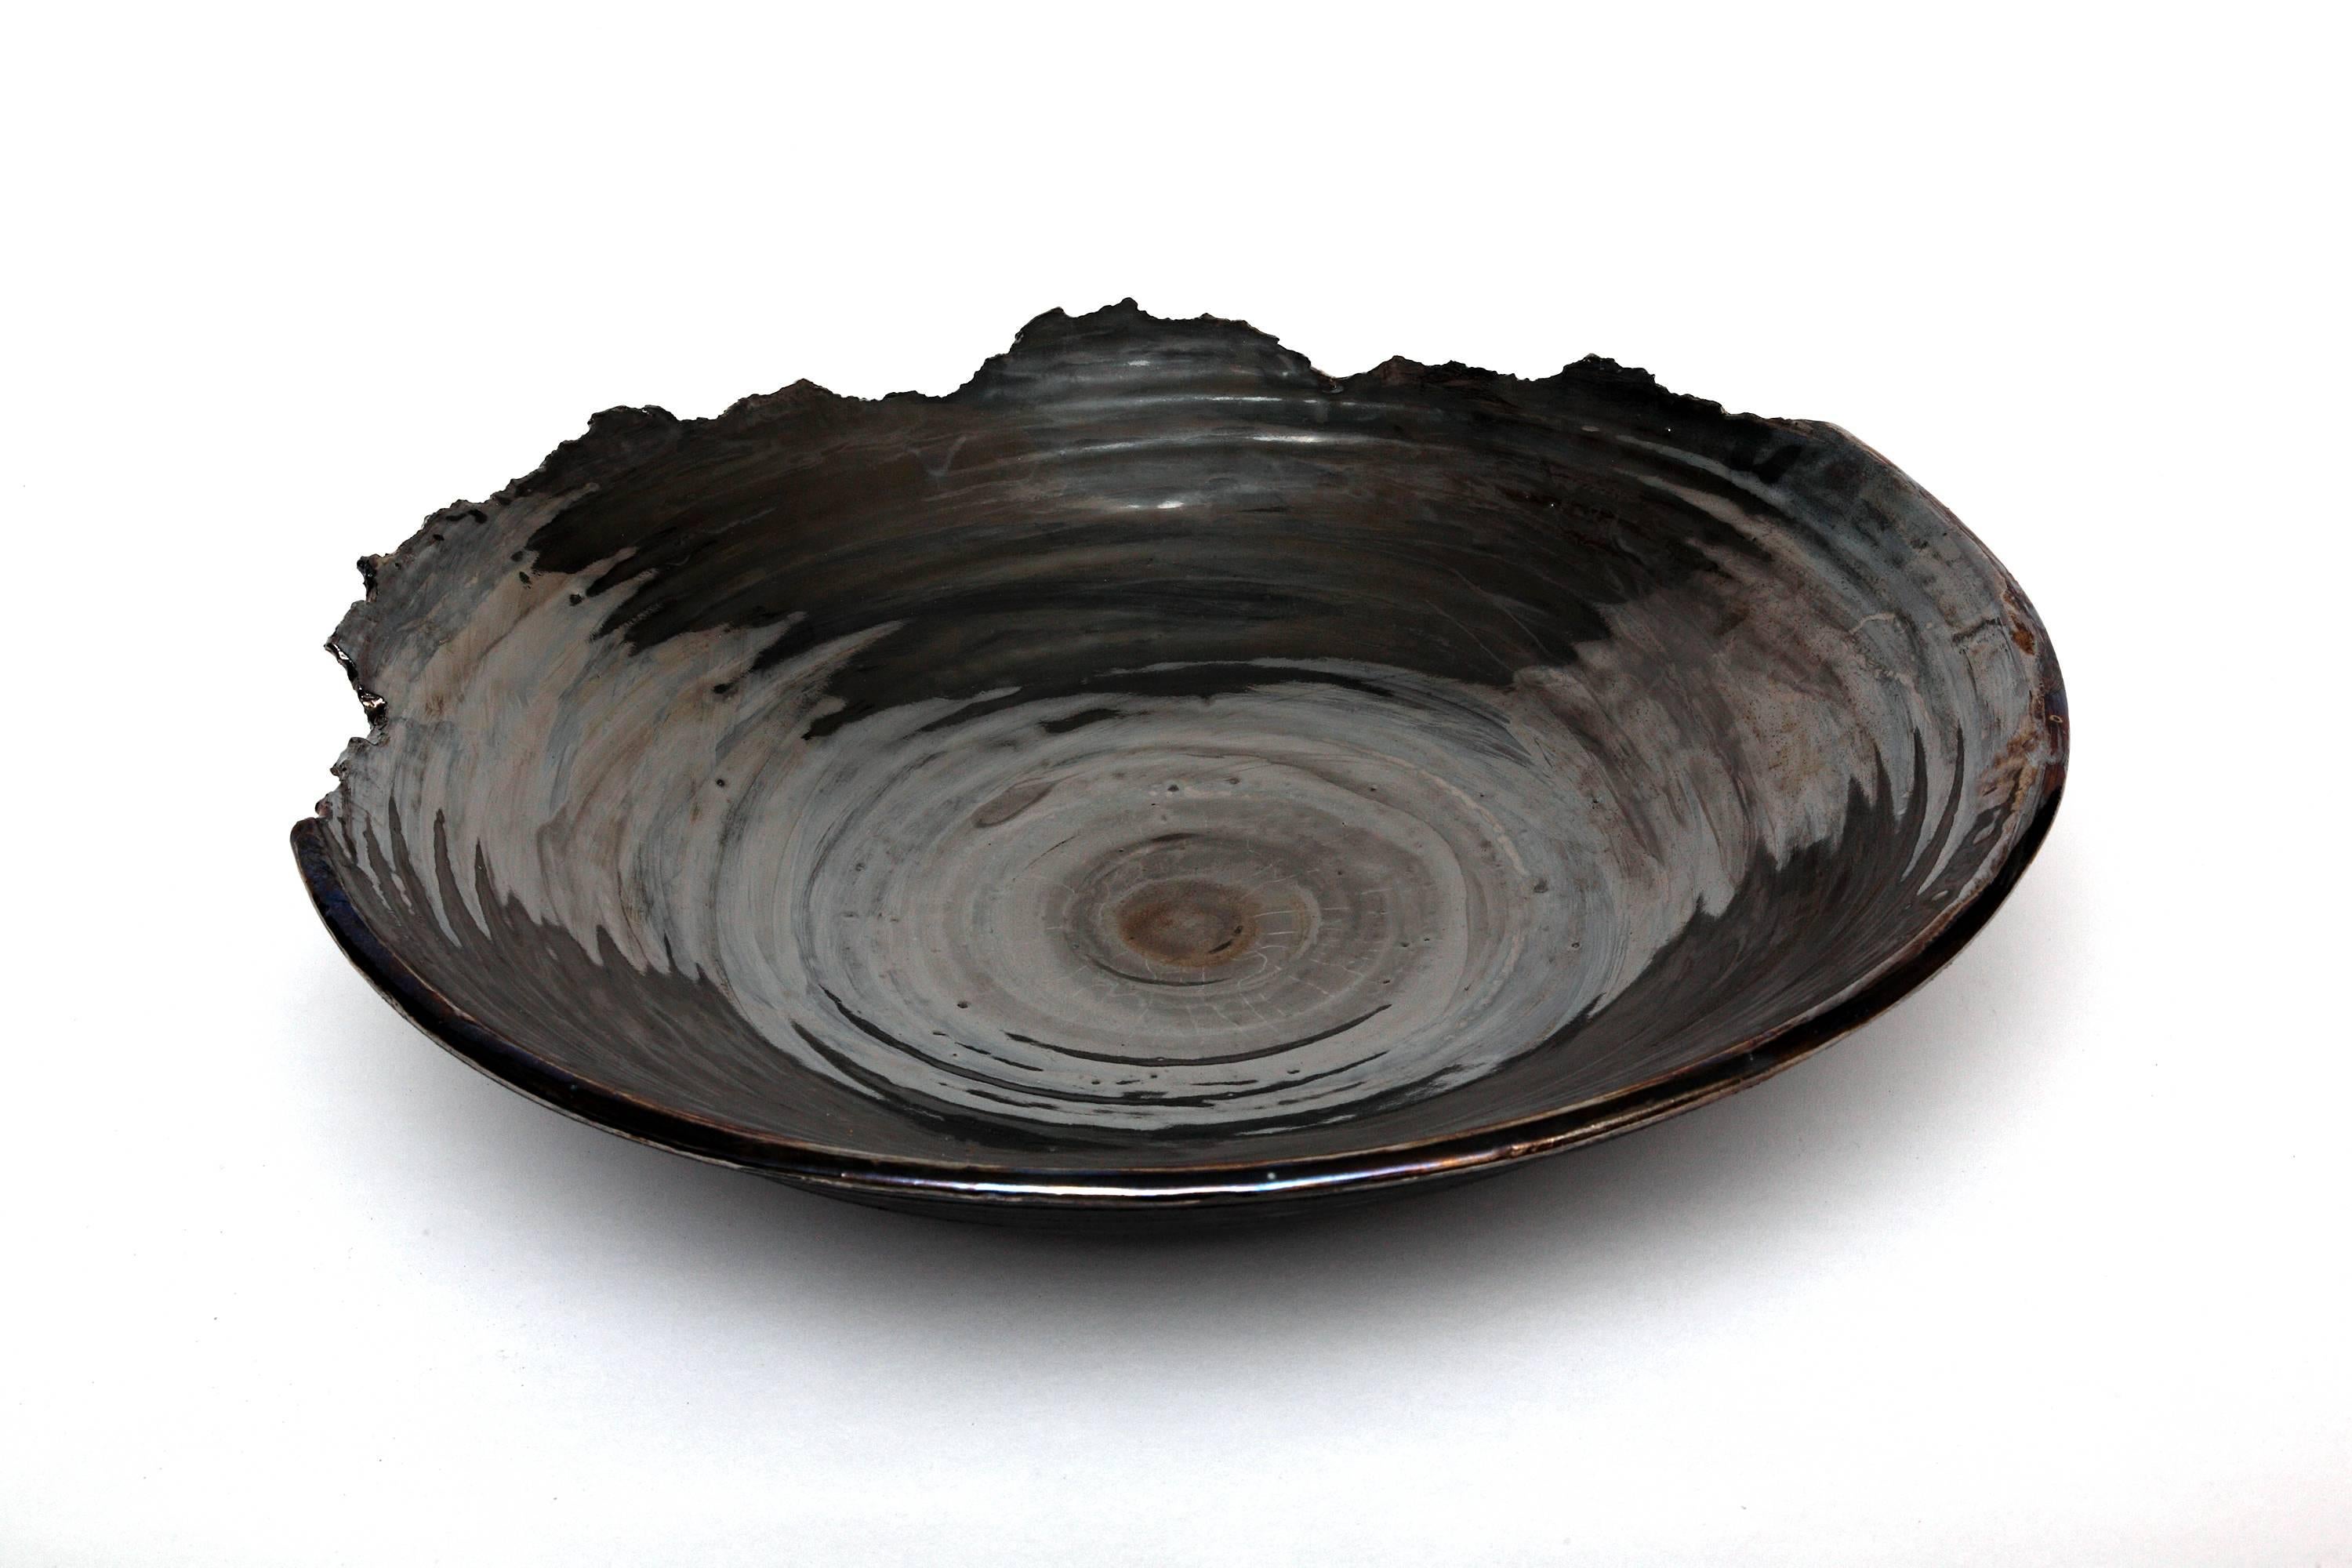 Stunning centerpiece by New Mexico ceramist artist Tatiana. She transforms clay into museum-quality stoneware thanks to her innovative use of carefully brushed precious metals—23-karat gold and platinum glaze—that give her work celestial